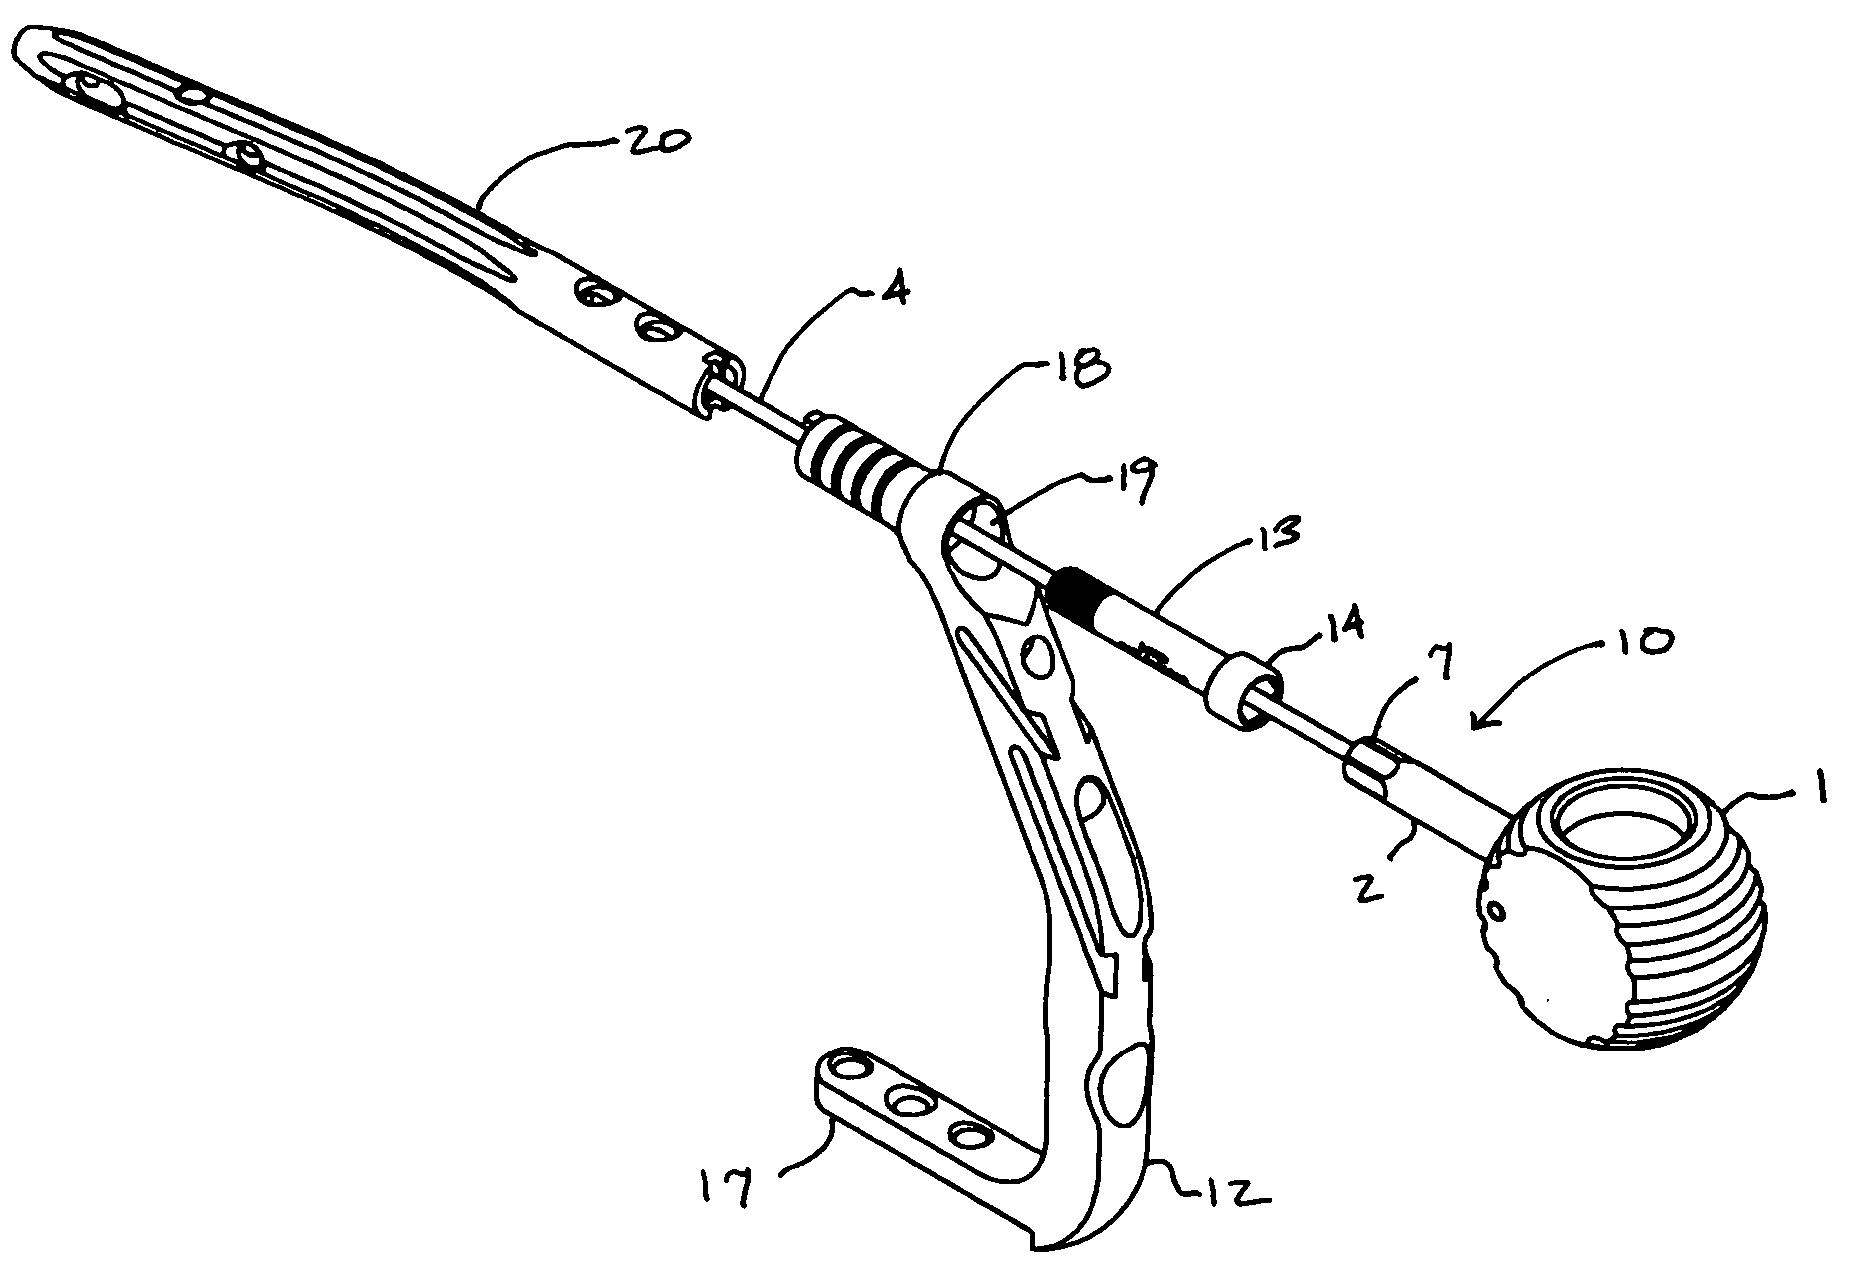 Implant assembly device